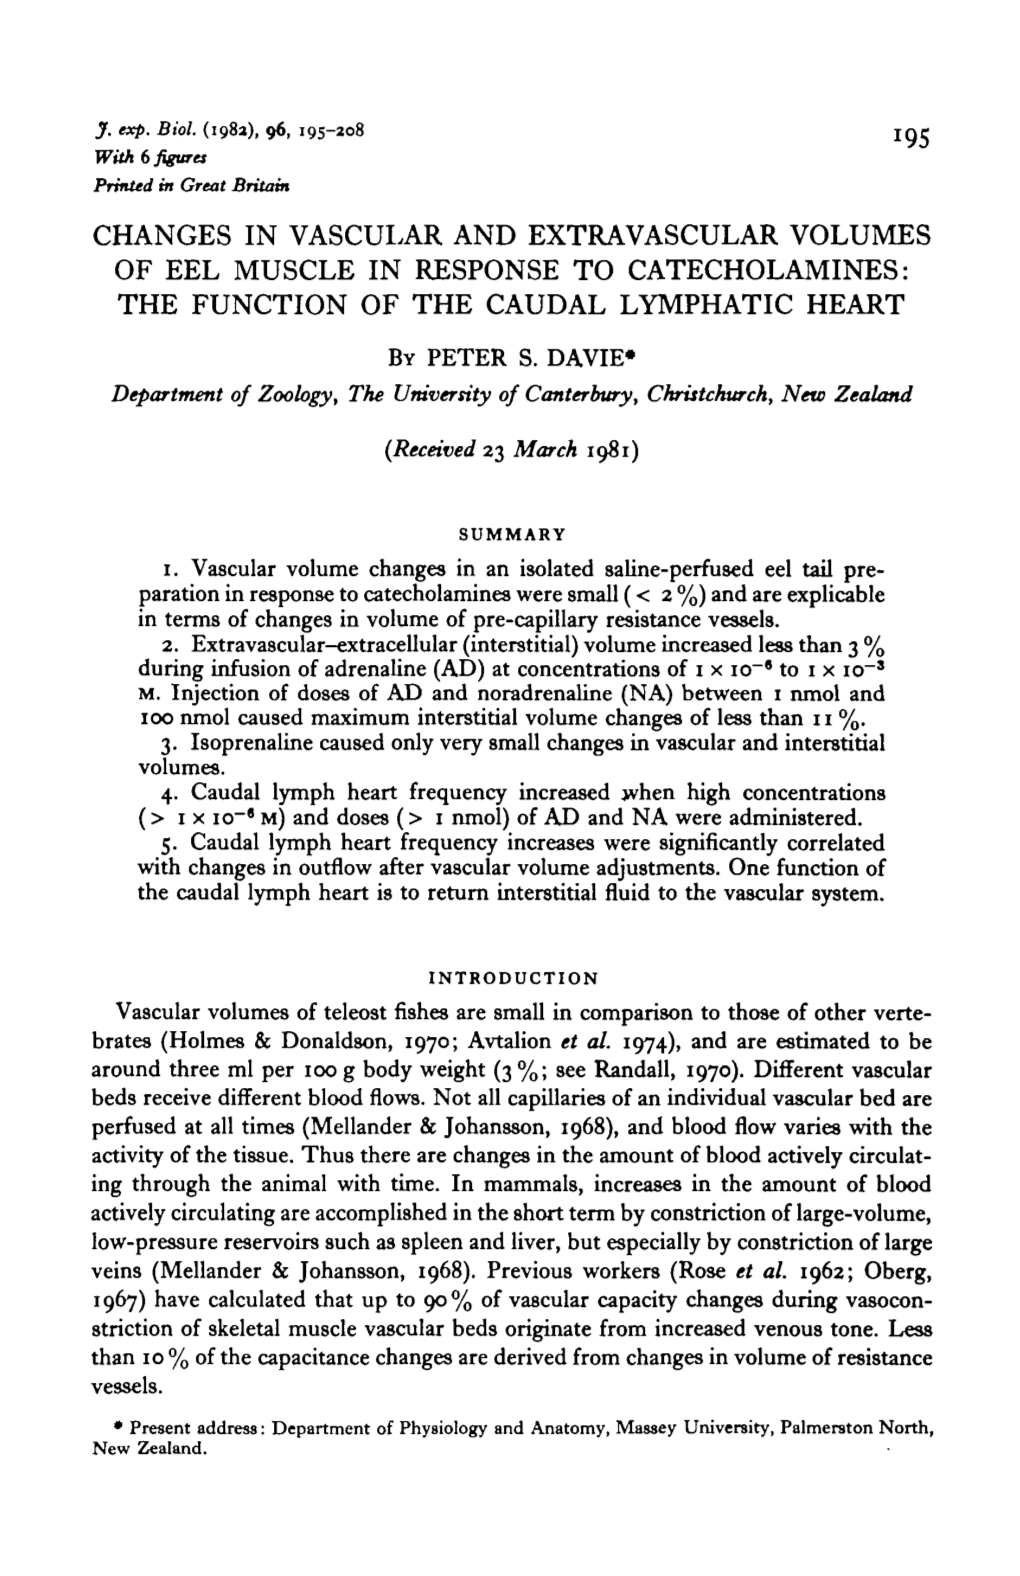 The Function of the Caudal Lymphatic Heart